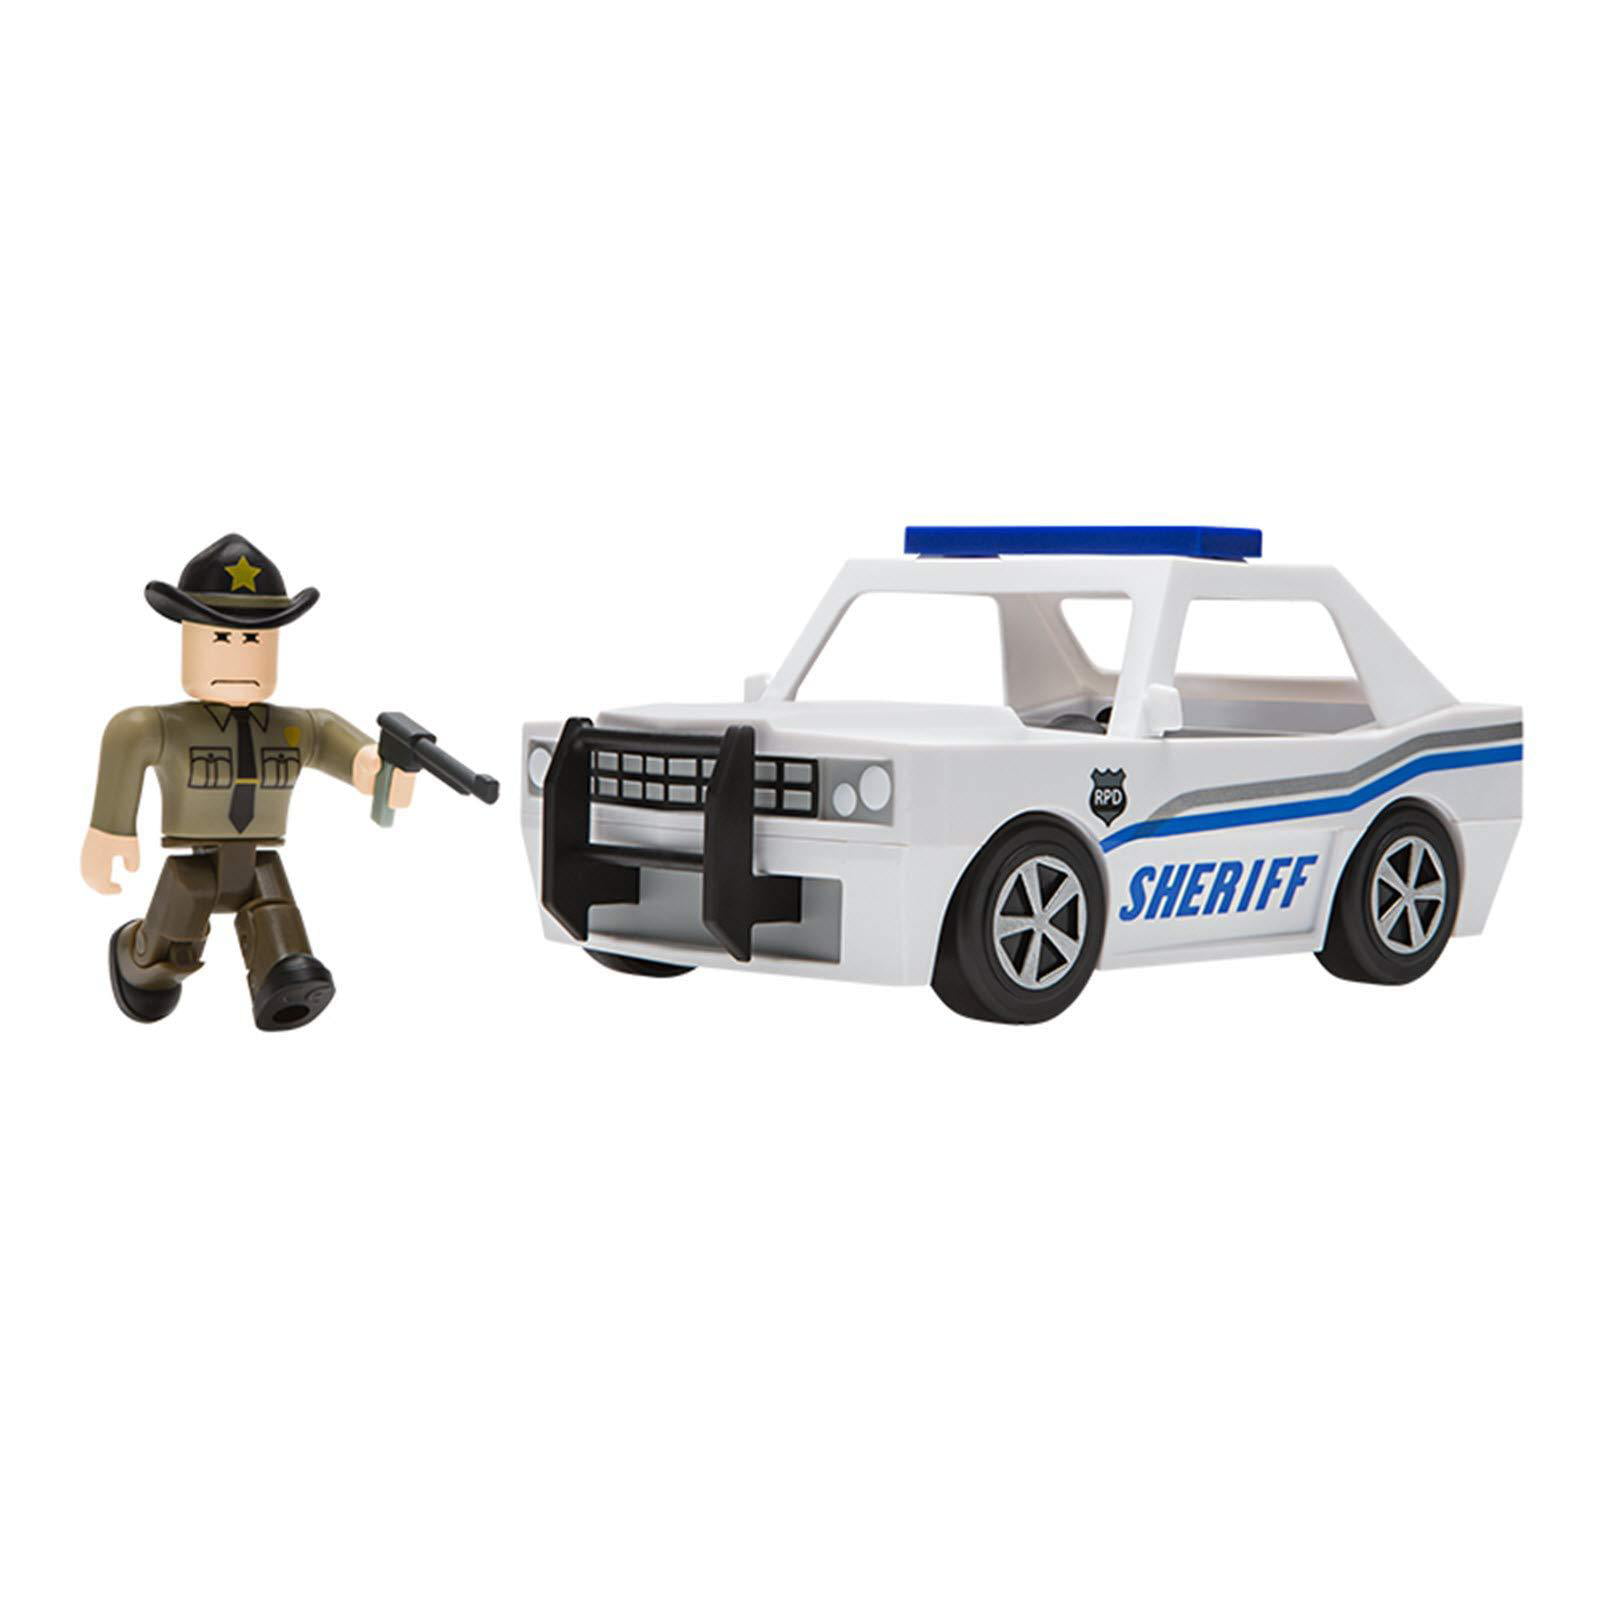 Roblox The Neighborhood Of Robloxia Patrol Car Vehicle Walmart Com Walmart Com - images of the town of robloxia in roblox